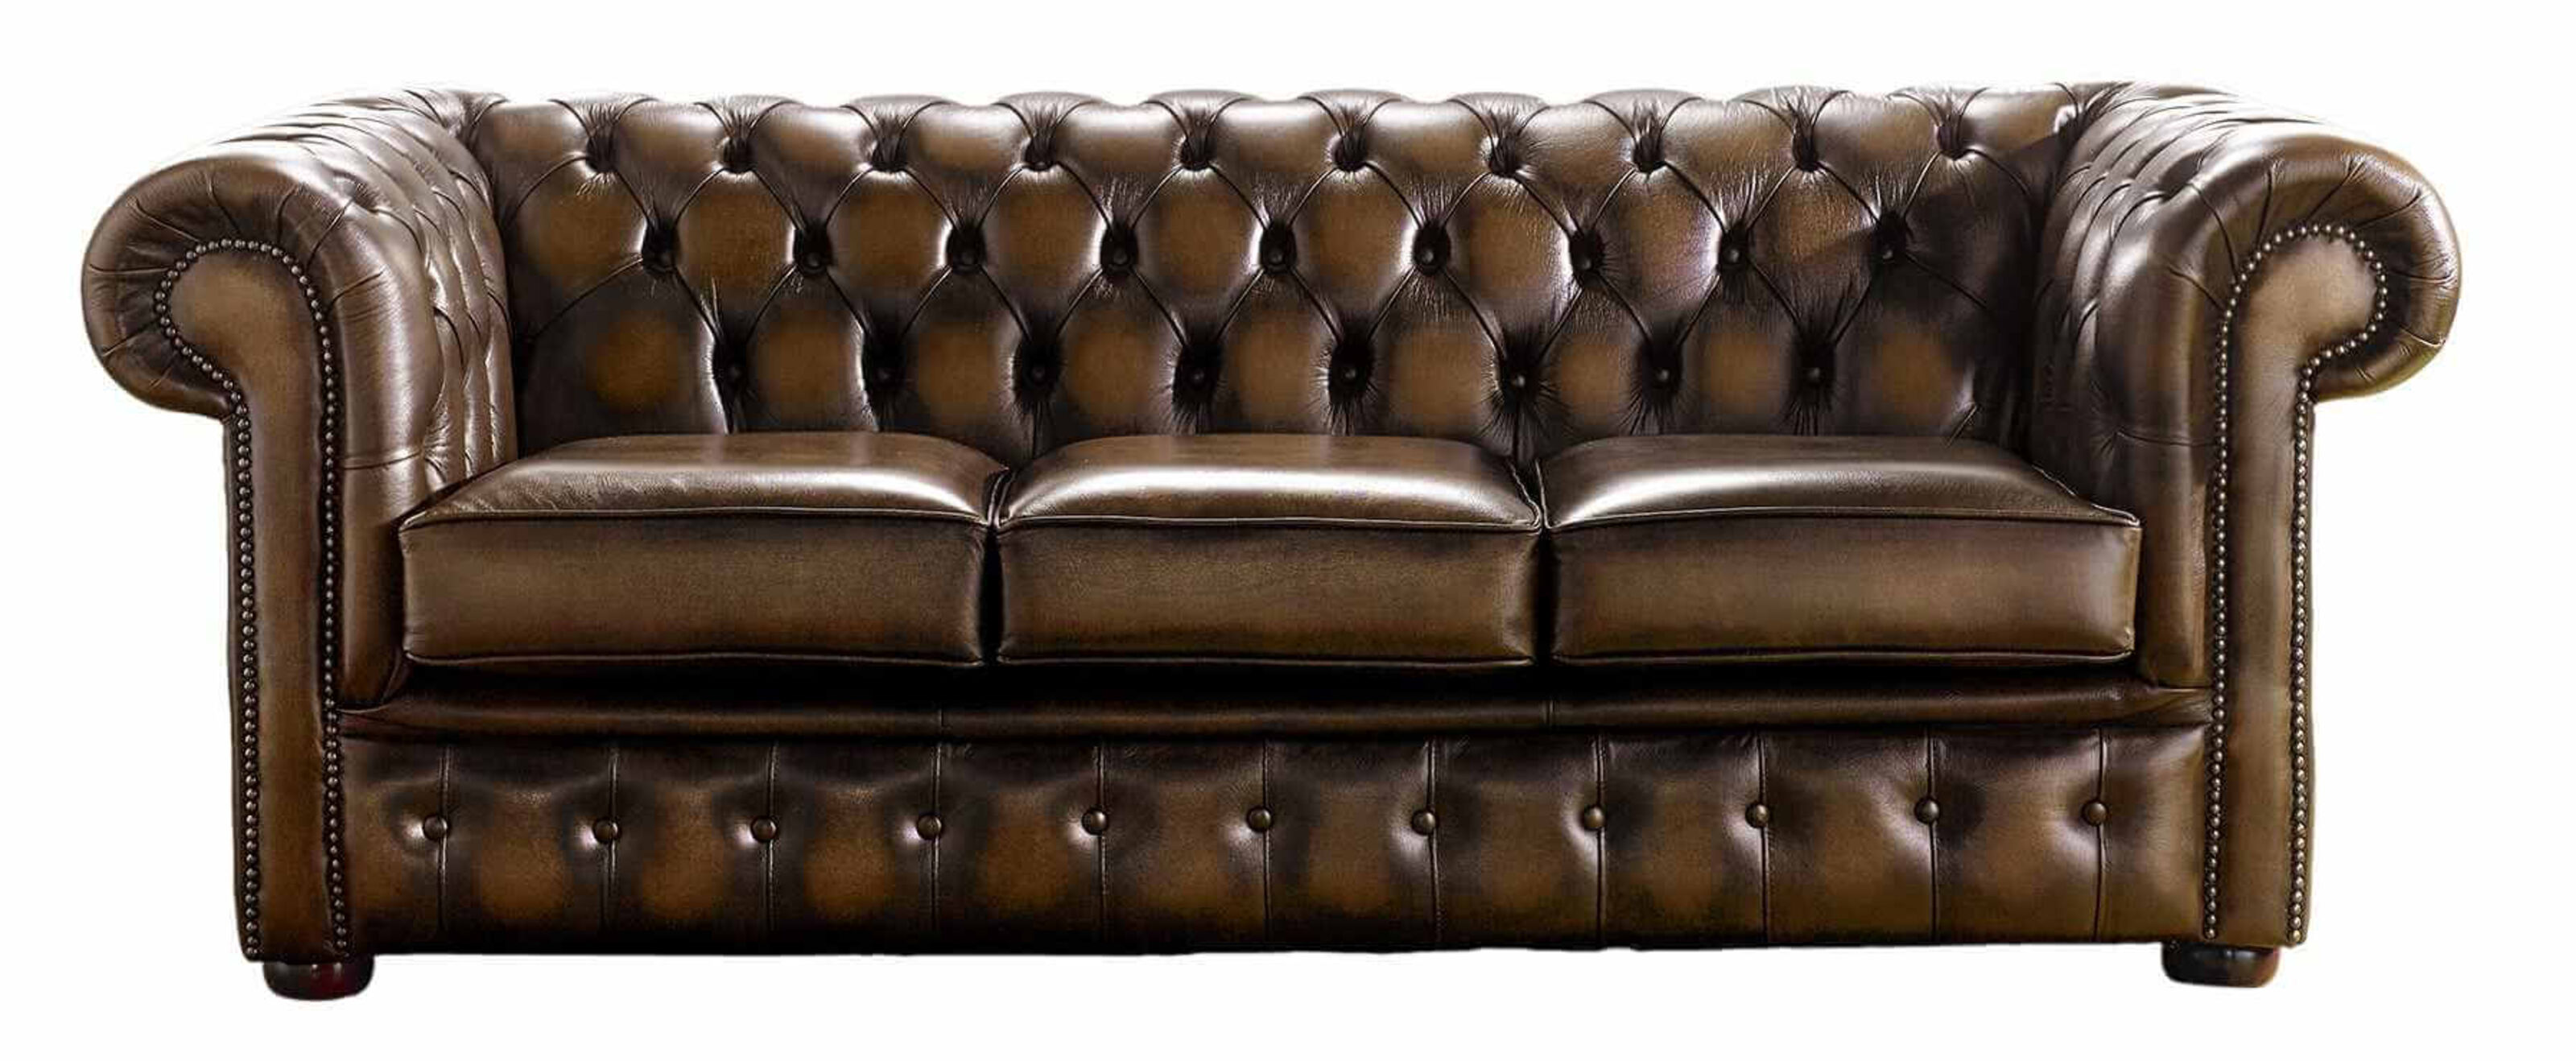 Chesterfield Sofas: A Legacy of Quality and Comfort  %Post Title